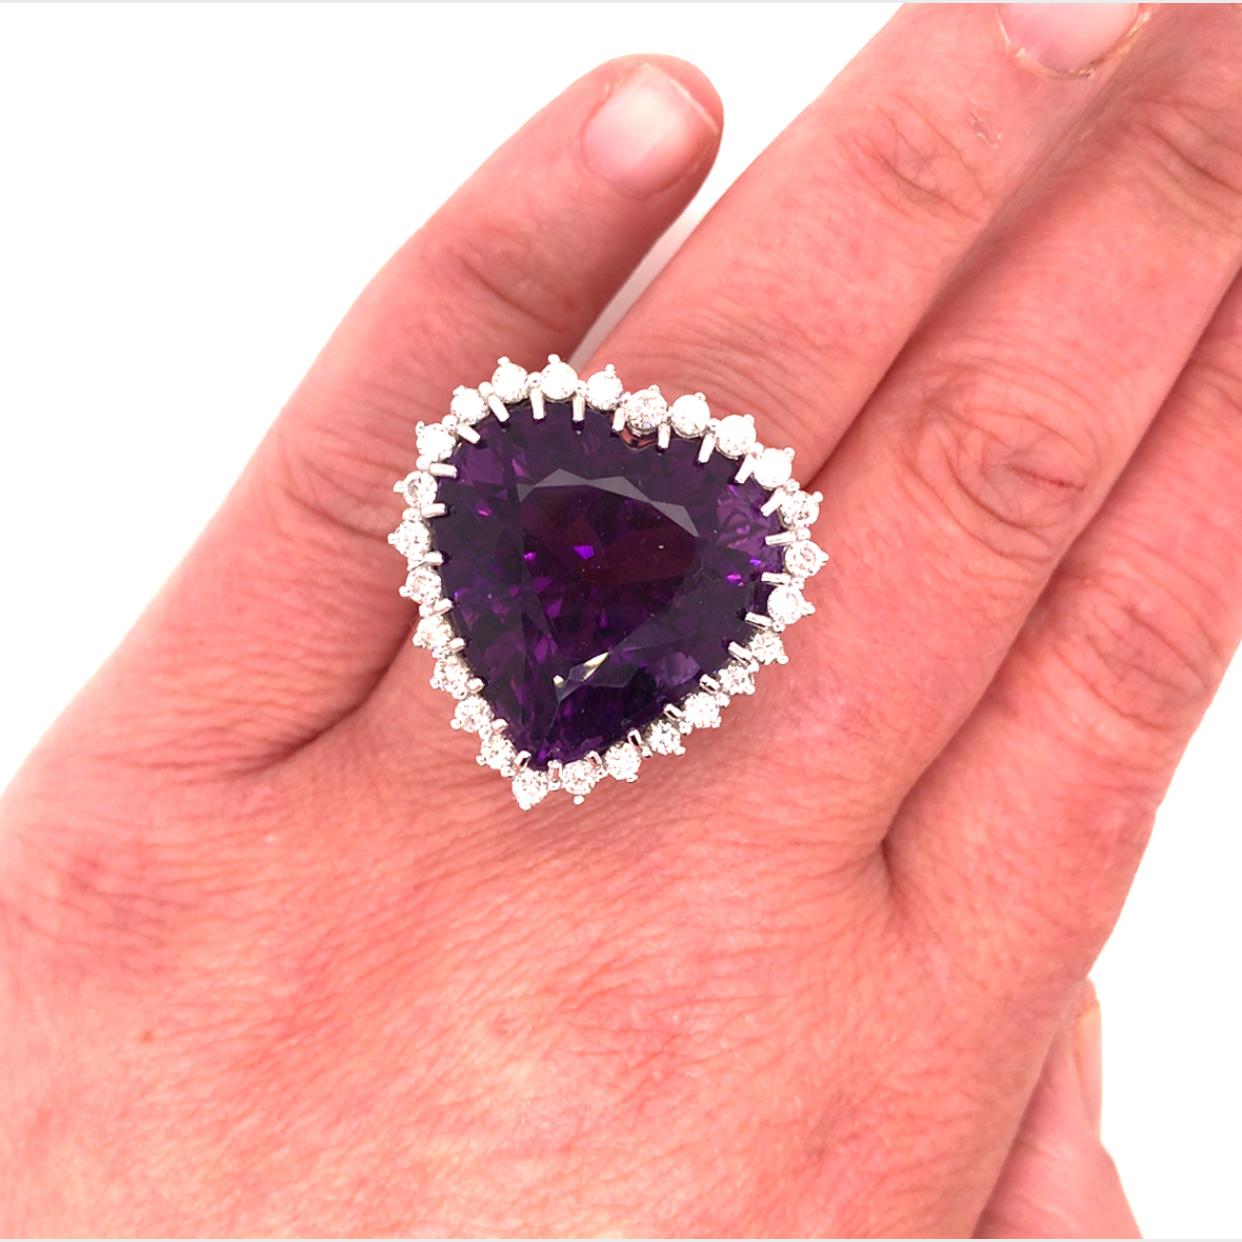 14K Heart Shape Royal Violet Amethyst Diamond Halo Ring White Gold In Good Condition For Sale In Boca Raton, FL